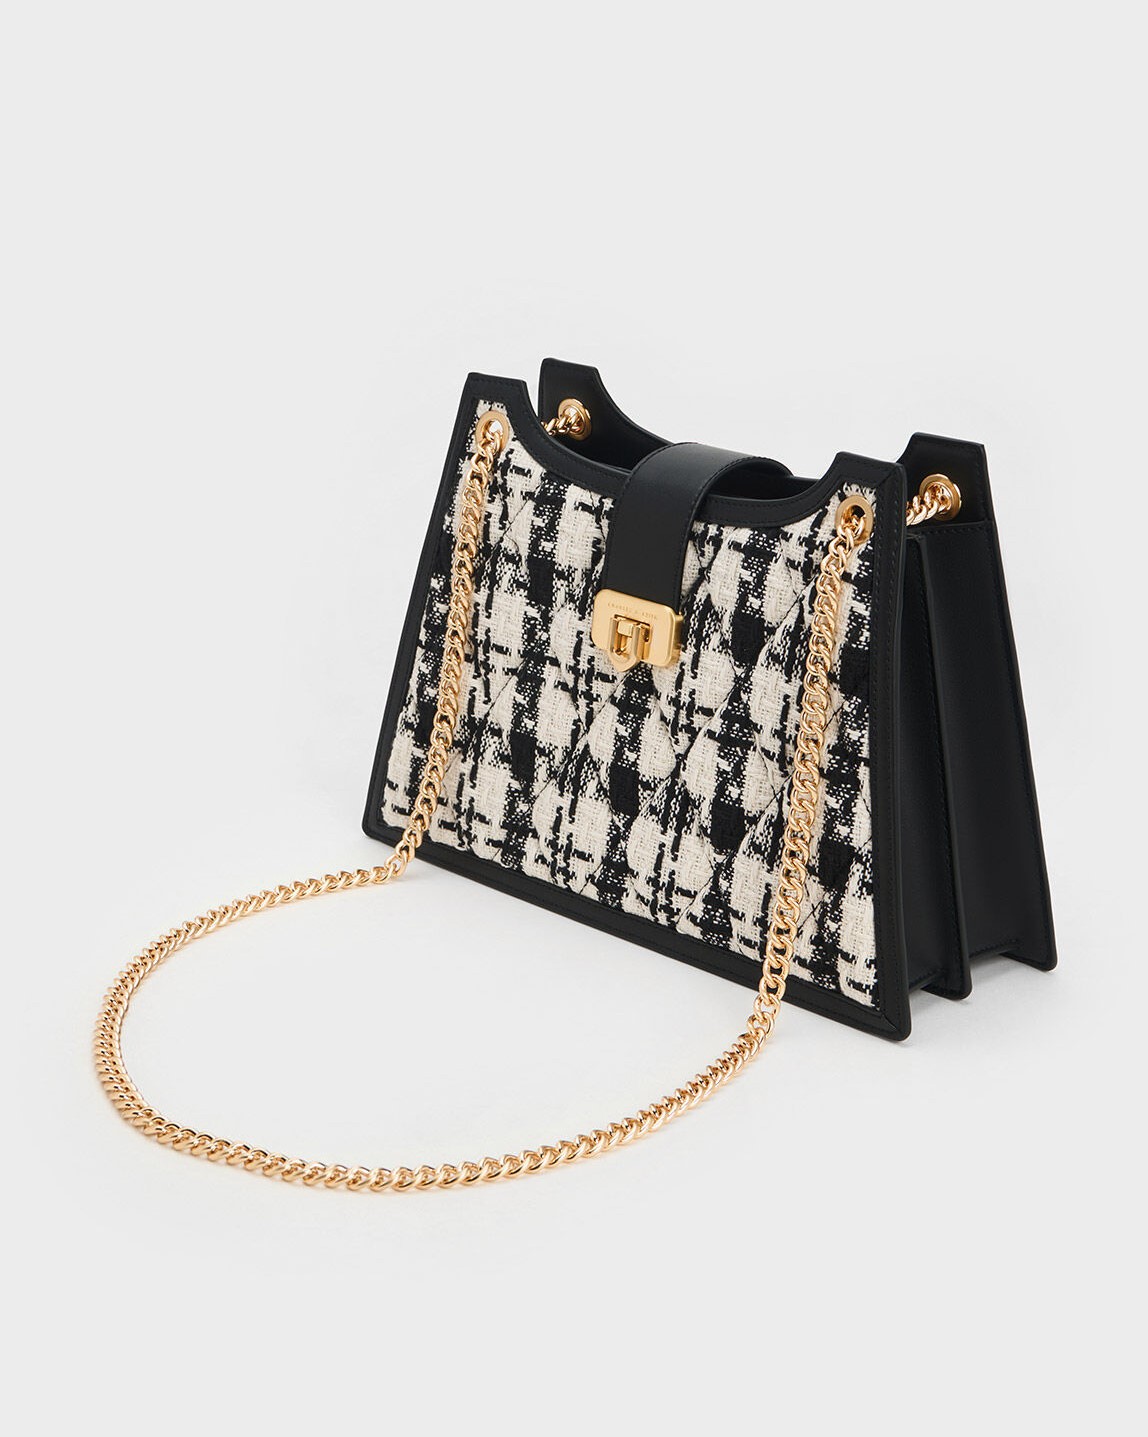 TÚI ĐEO VAI NỮ CNK CHARLES KEITH CRESSIDA QUILTED TRAPEZE CHAIN BAG CK2-30151307 4